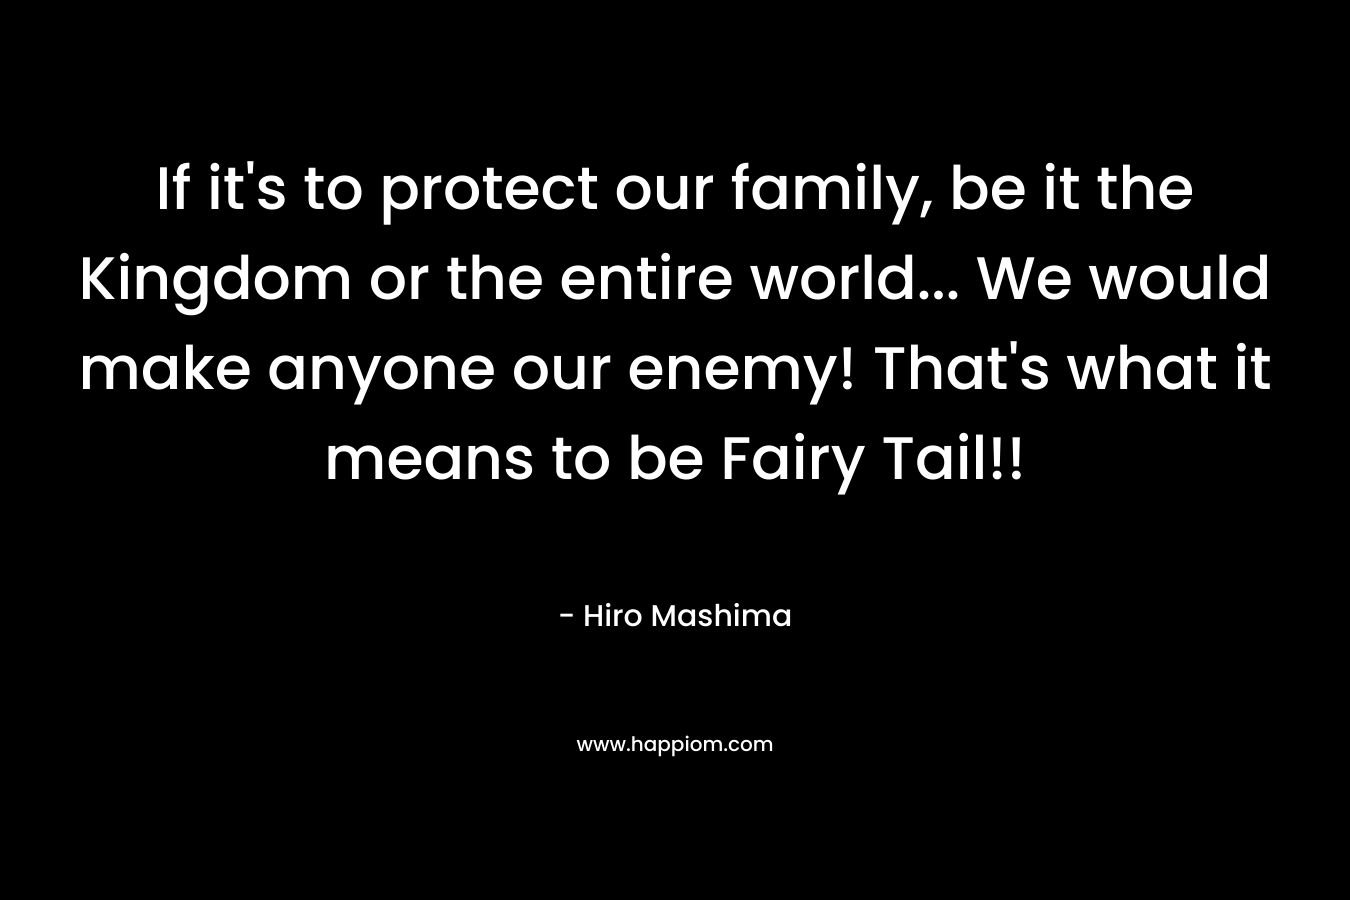 If it's to protect our family, be it the Kingdom or the entire world... We would make anyone our enemy! That's what it means to be Fairy Tail!!